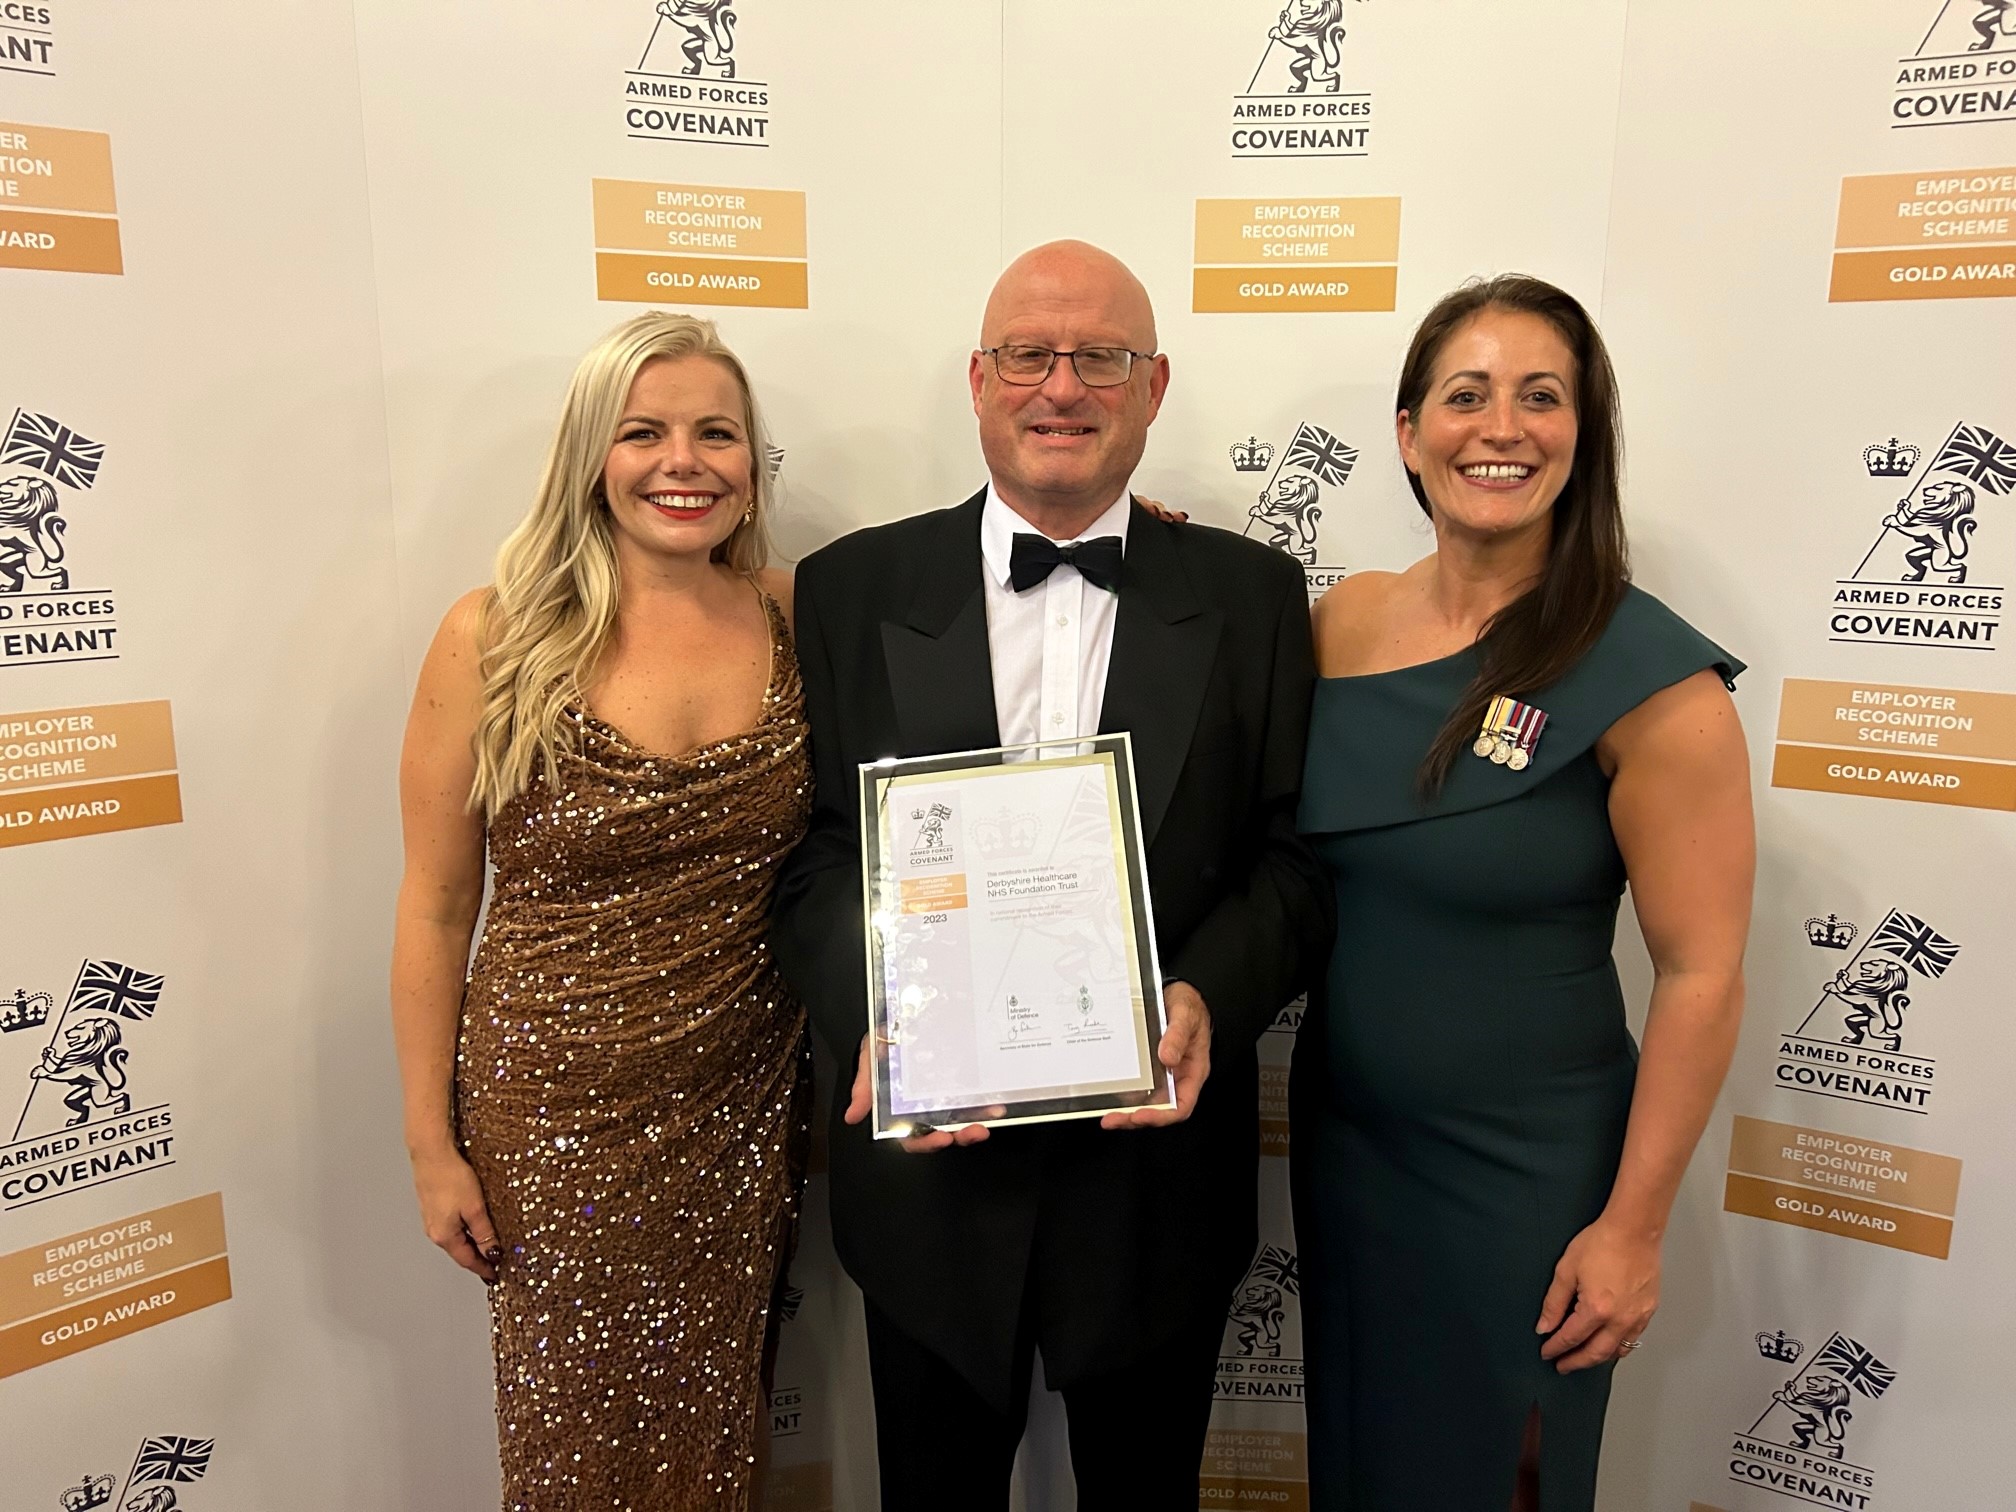 Trust receives gold award from the Defence Employer Recognition Scheme